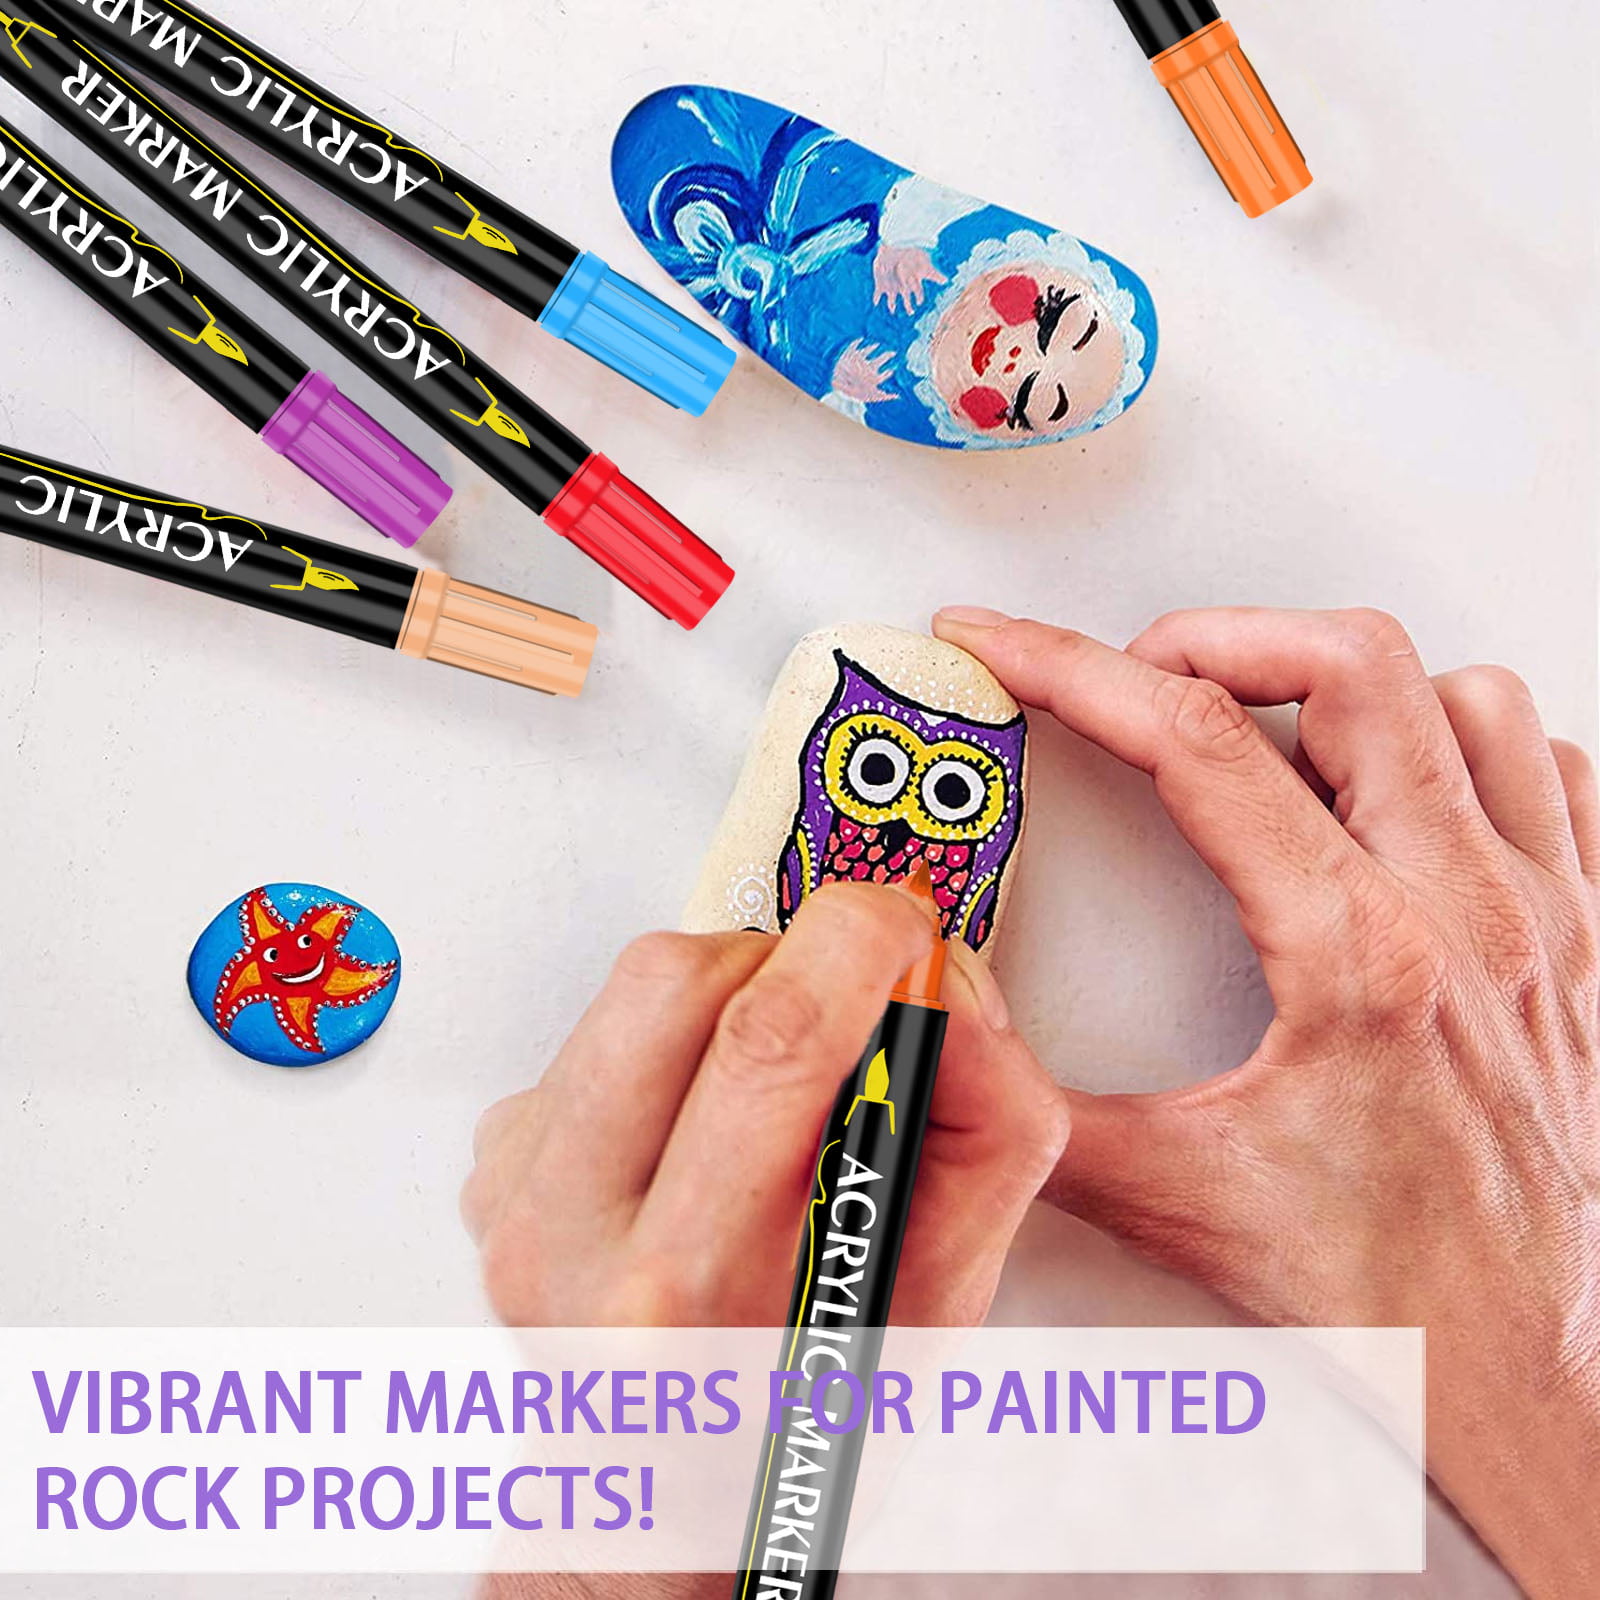 EXCEART 1 Set Colored Markers Crafts for Adults Art Marker Pens Craft Paint  Pen Art Supplies for Kids 9-12 Acrylic Painting Pen Kids Diy Pens Rocks